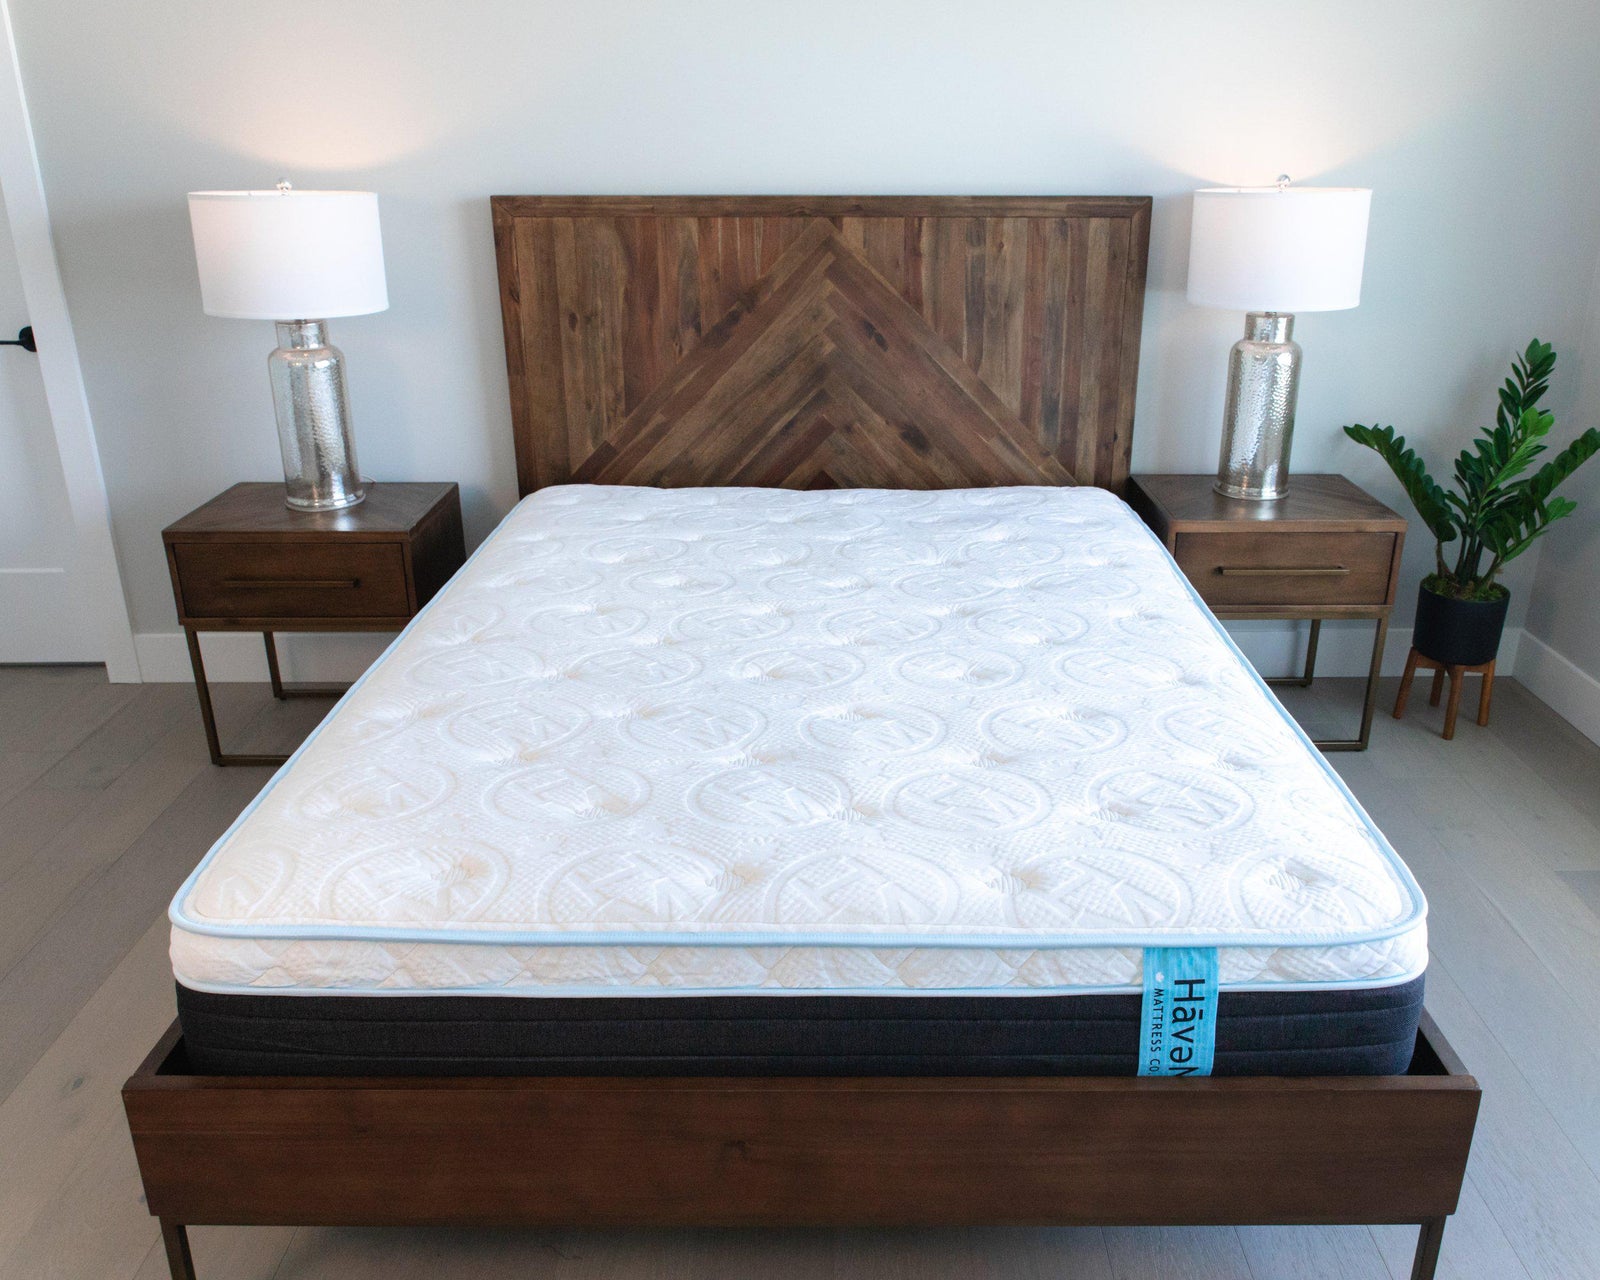 Showcase of 12" Hybrid Eurotop Haven Mattress with embossed Haven logo on top of wooden bedframe and headboard with wooden side tables and lamps